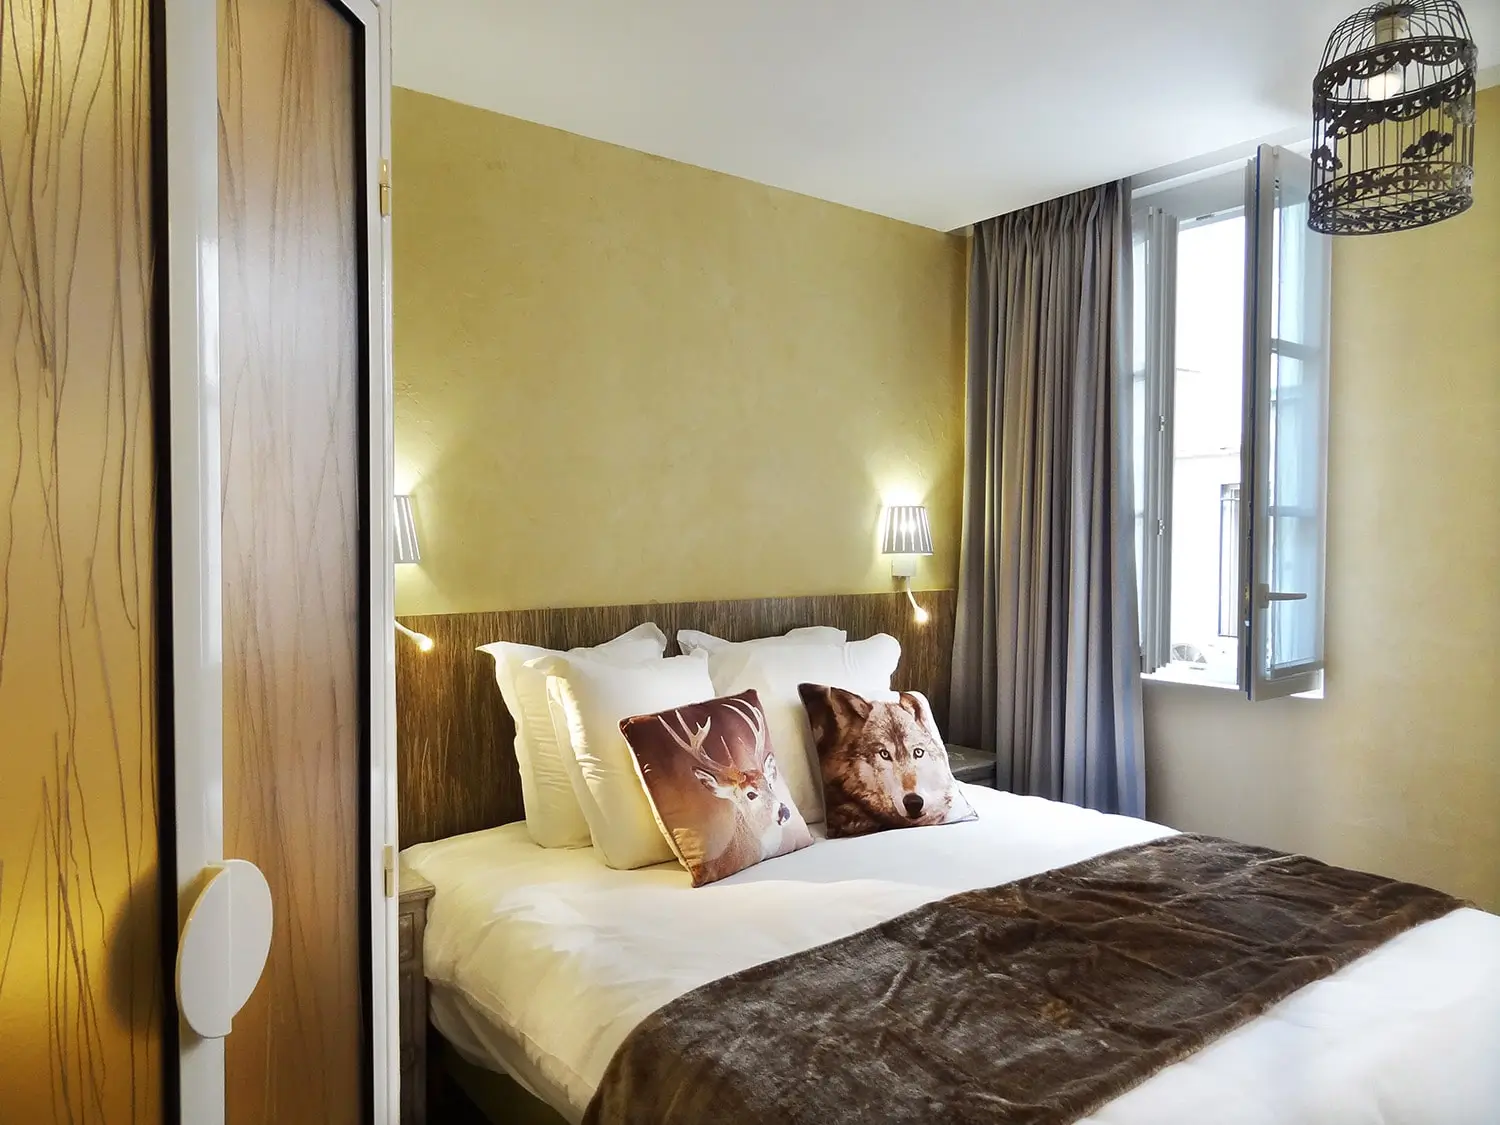 Sustainable elegance in Hotel Pavillon Paris' double room, with natural-toned decor, a plush bed featuring animal-themed pillows, and eco-friendly lighting.